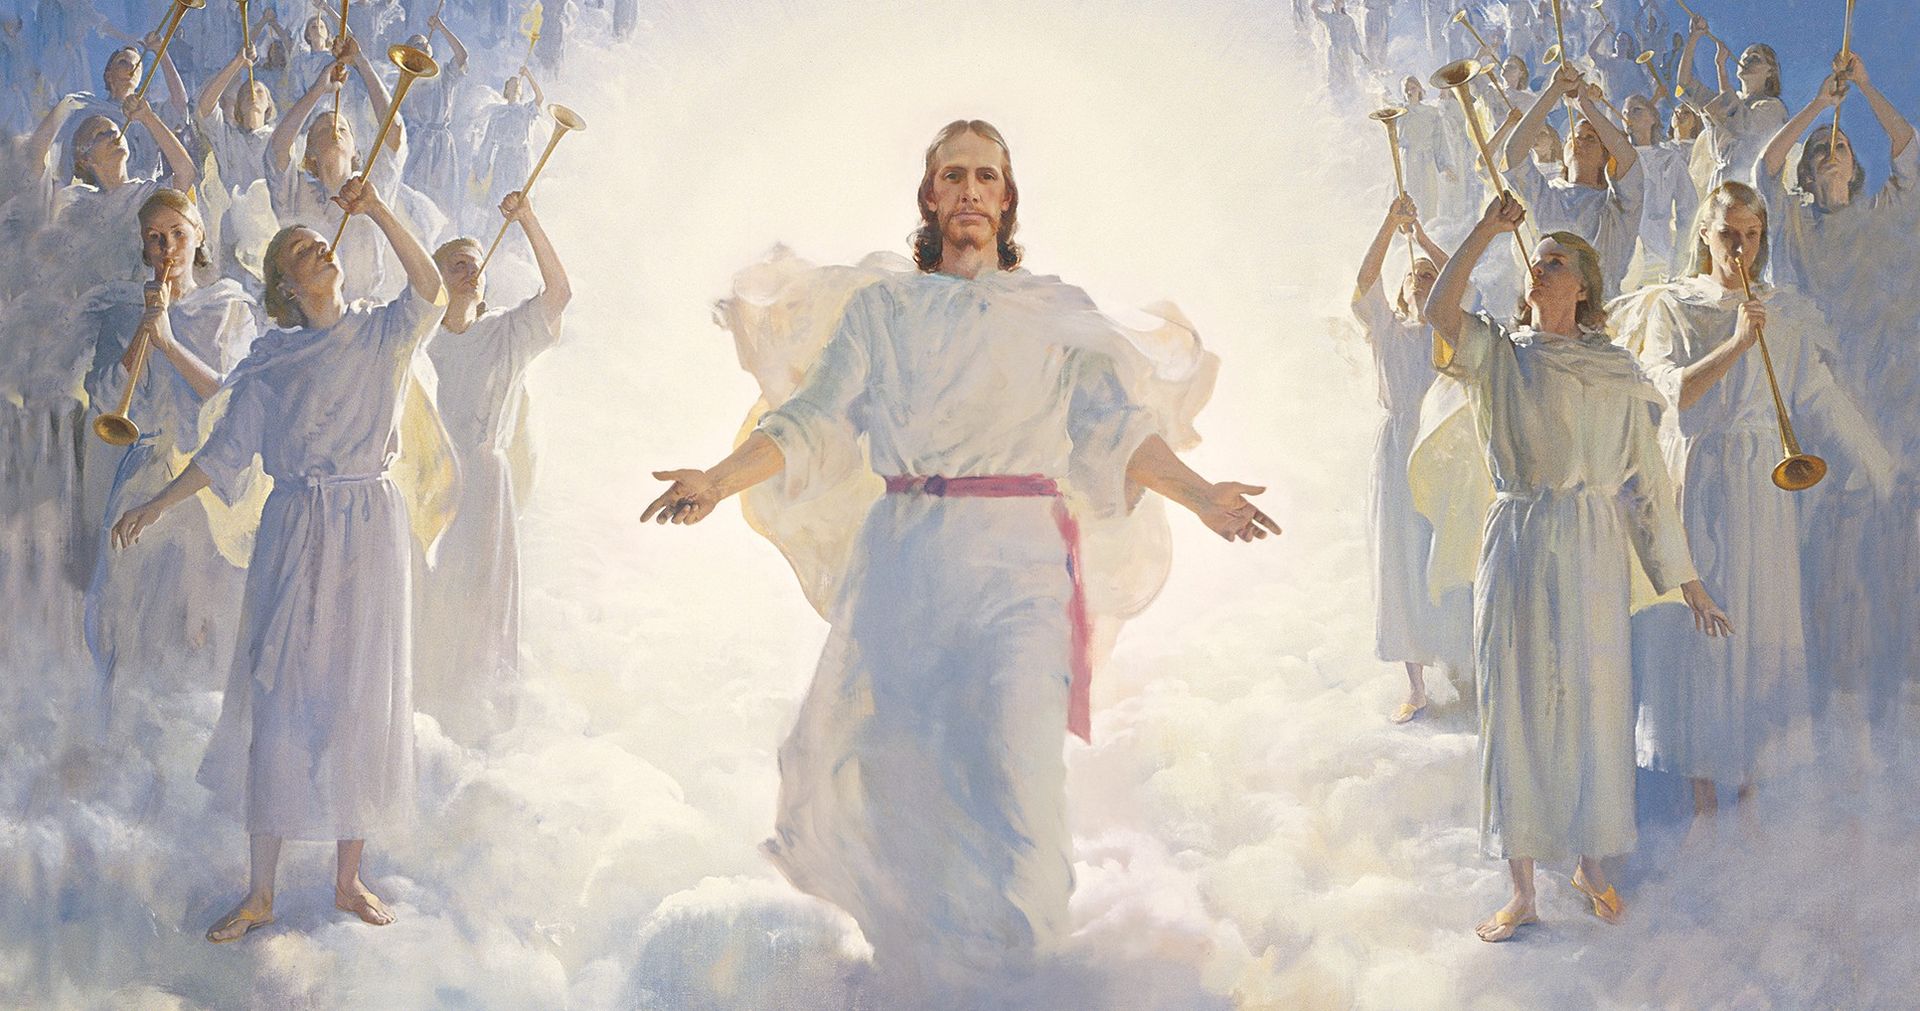 The resurrected Jesus Christ (wearing white robes with a magenta sash) standing above a large gathering of clouds. Christ has His arms partially extended. The wounds in the hands of Christ are visible. Numerous angels (each blowing a trumpet) are gathered on both sides of Christ. A desert landscape is visible below the clouds. The painting depicts the Second coming of Christ. (Acts 1:11)